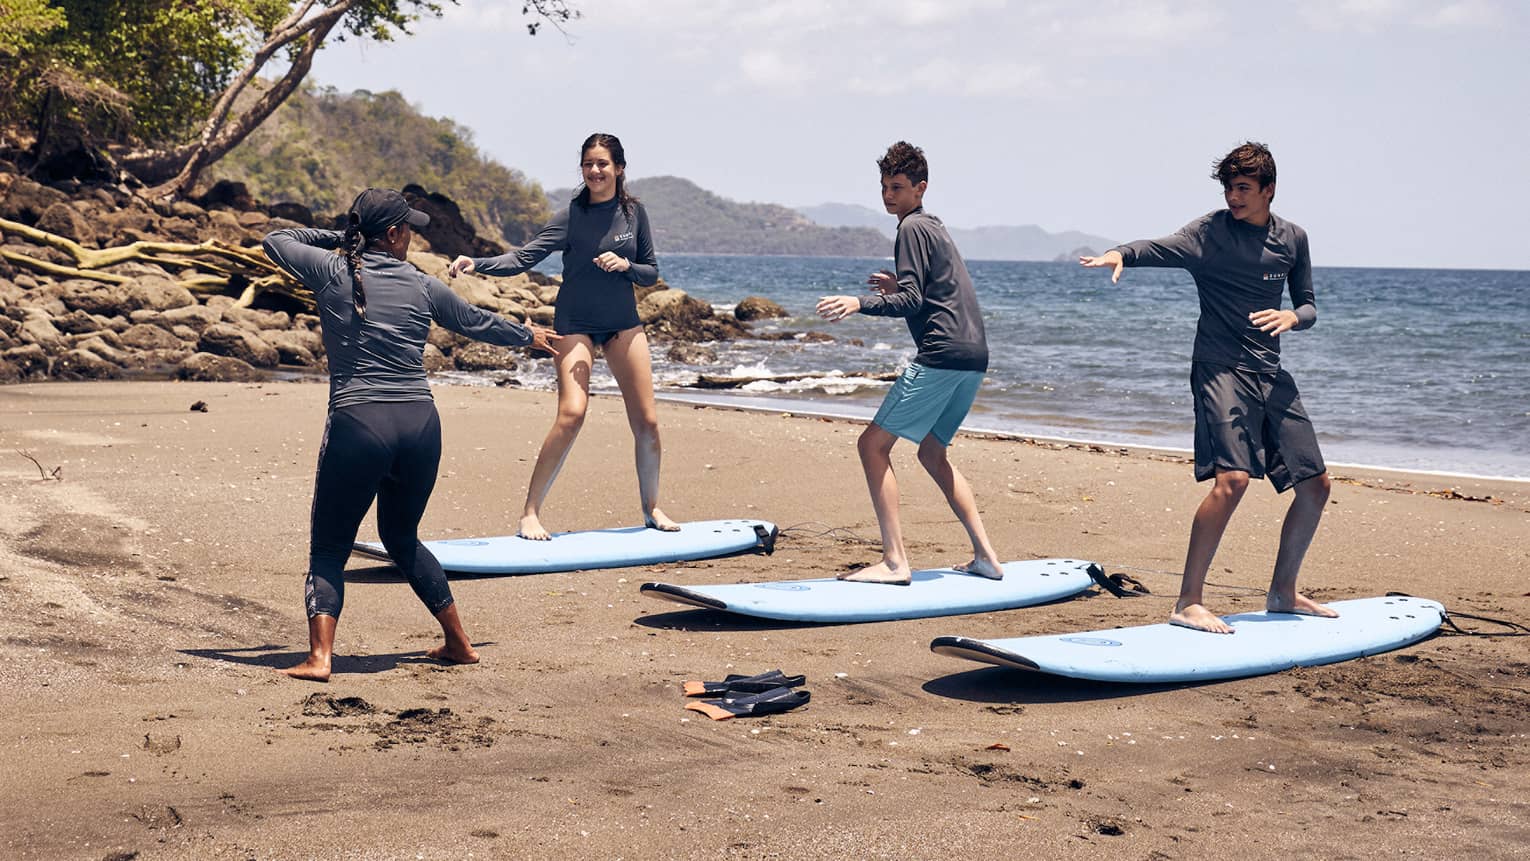 Three young people practice standing on a surfboard on the sand while an instructor guides them